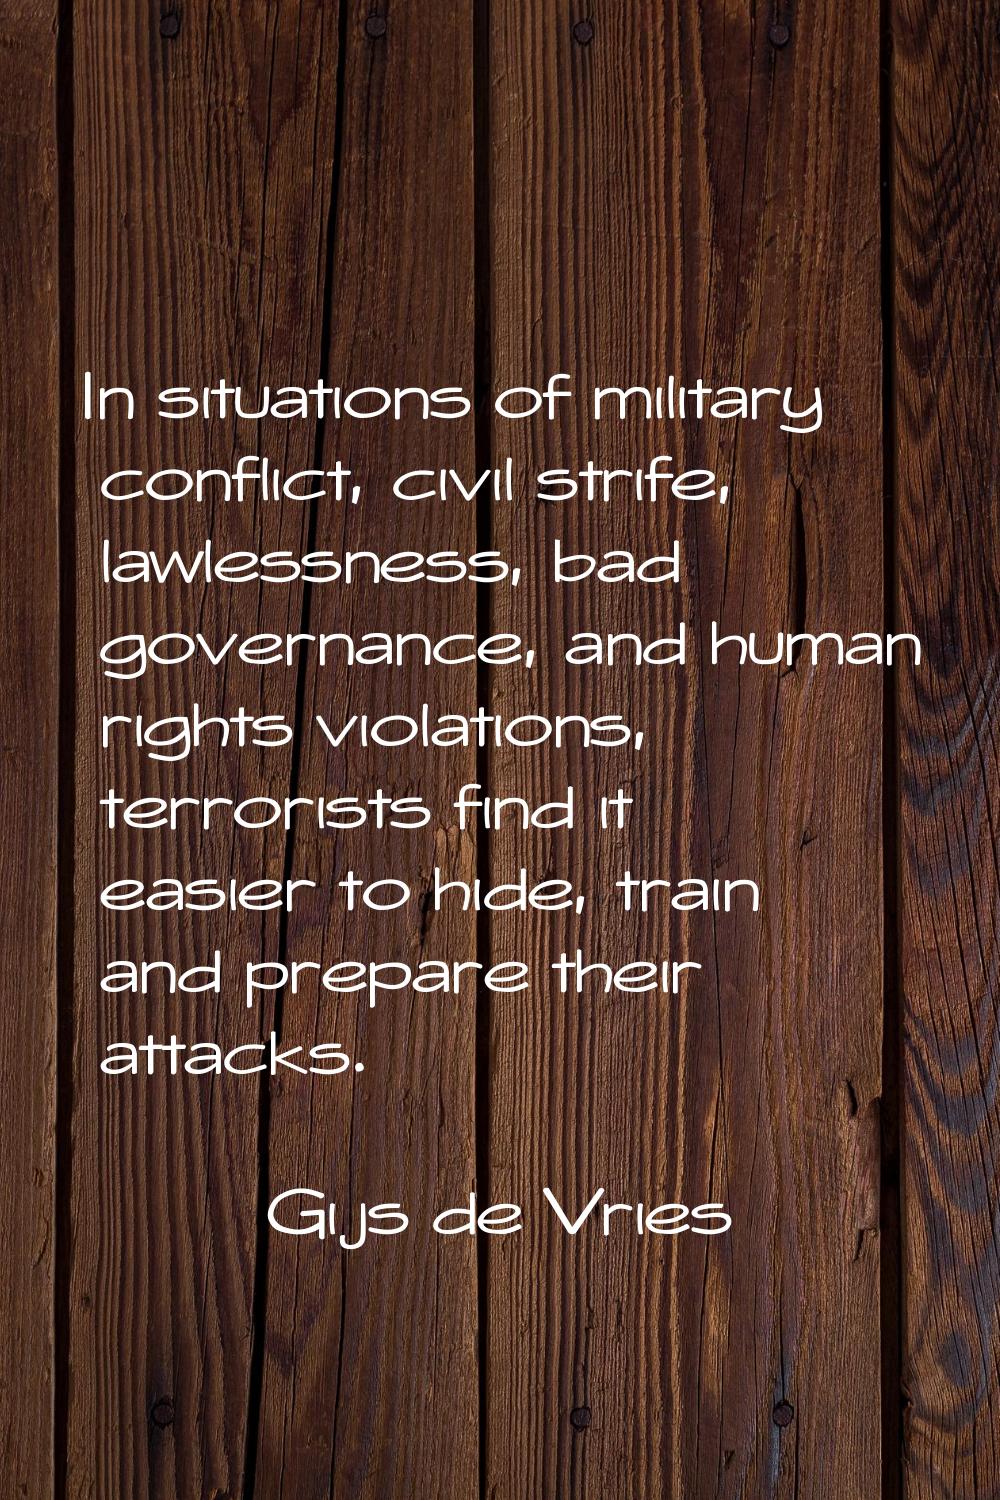 In situations of military conflict, civil strife, lawlessness, bad governance, and human rights vio